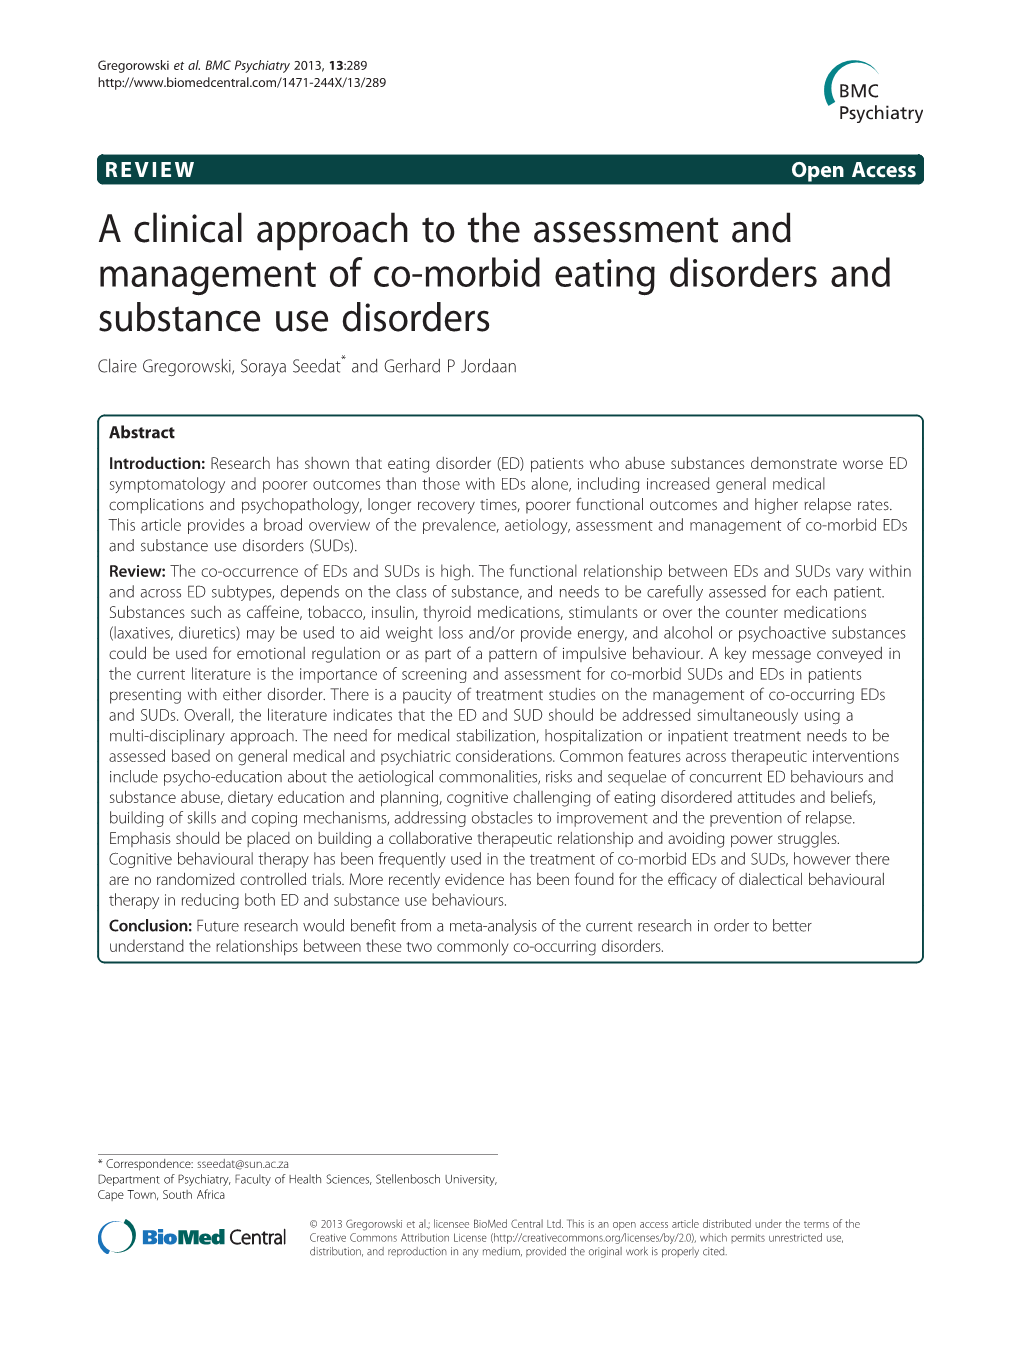 A Clinical Approach to the Assessment and Management of Co-Morbid